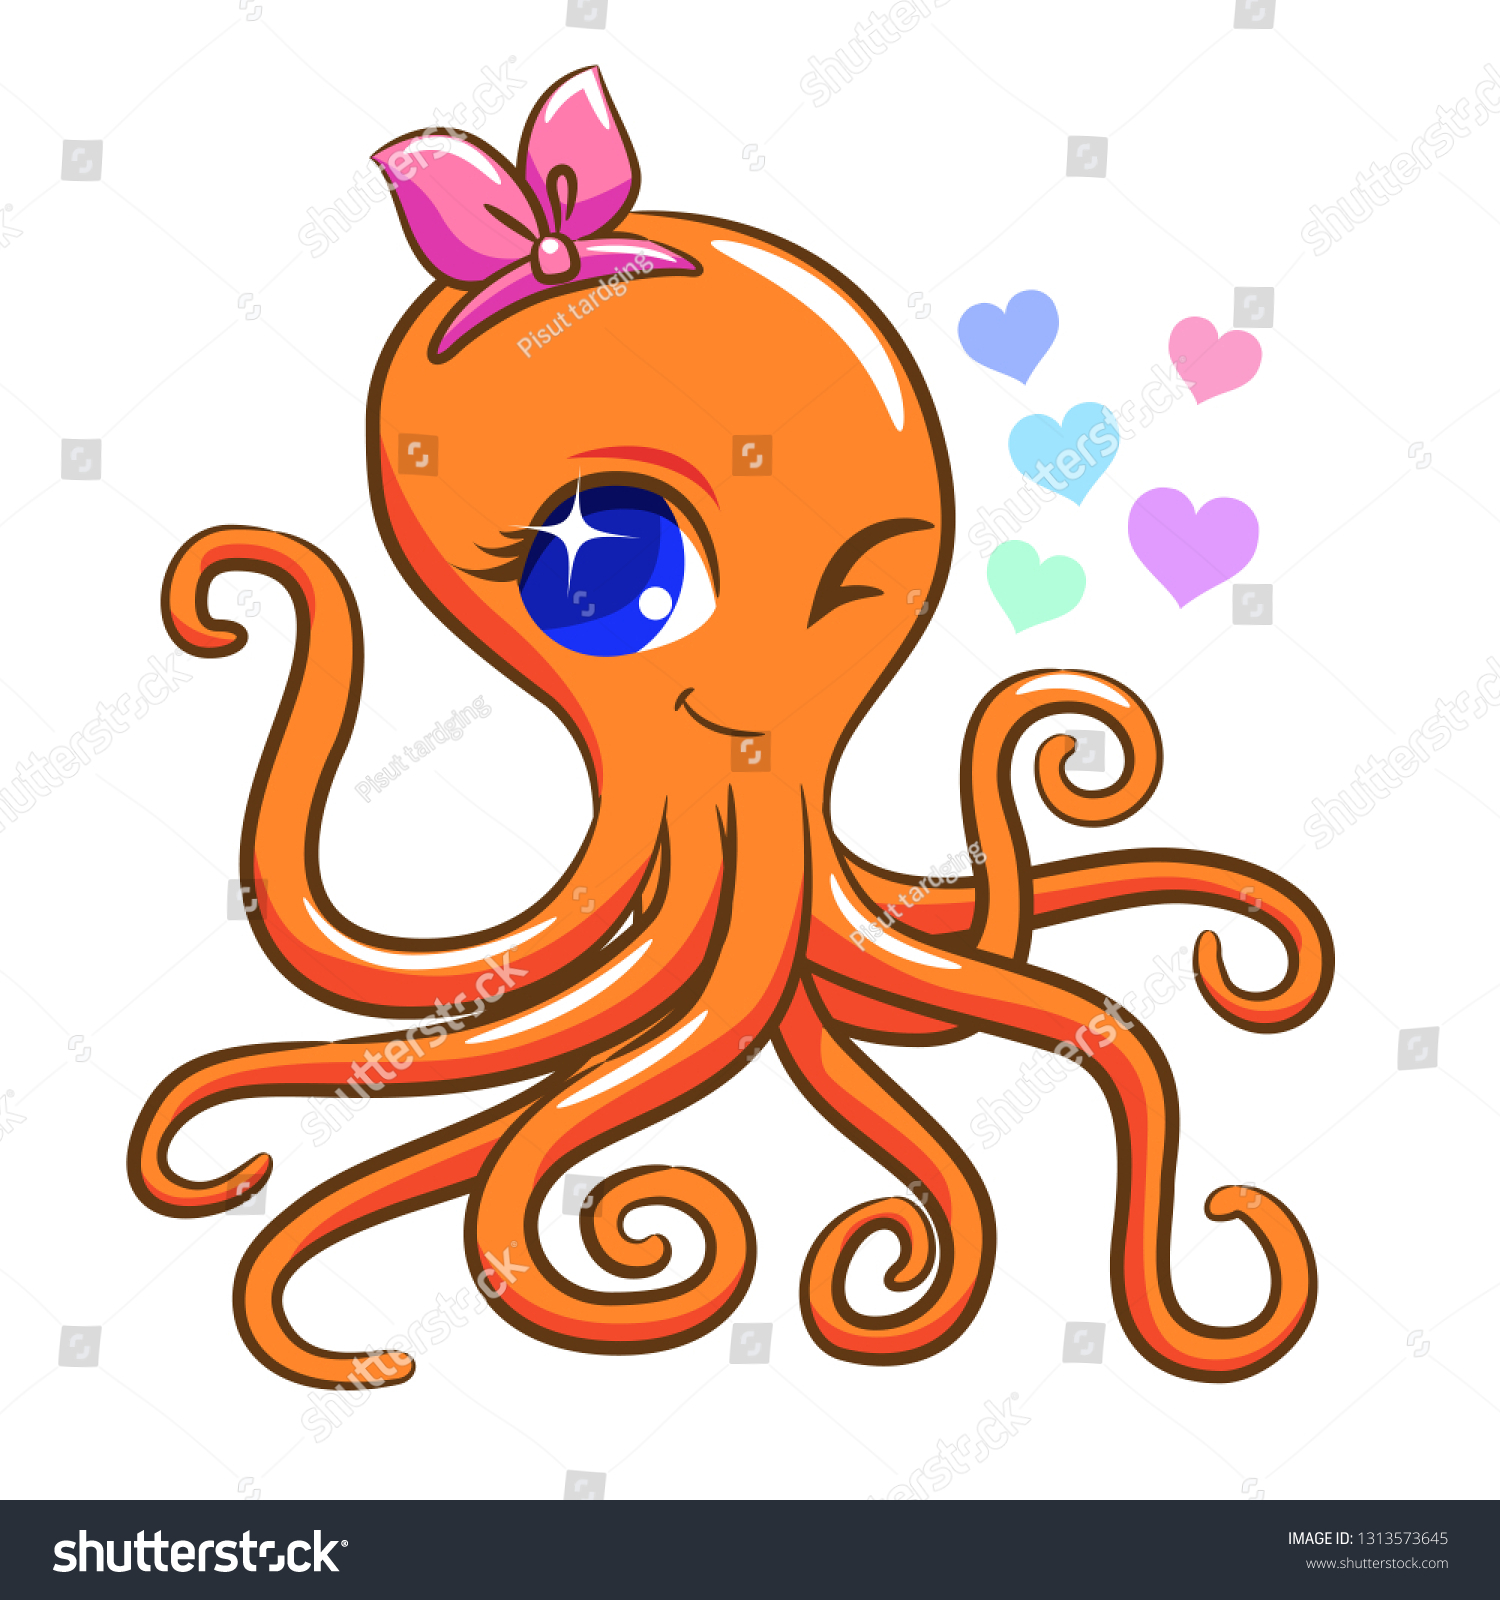 Octopus Clipart to free download